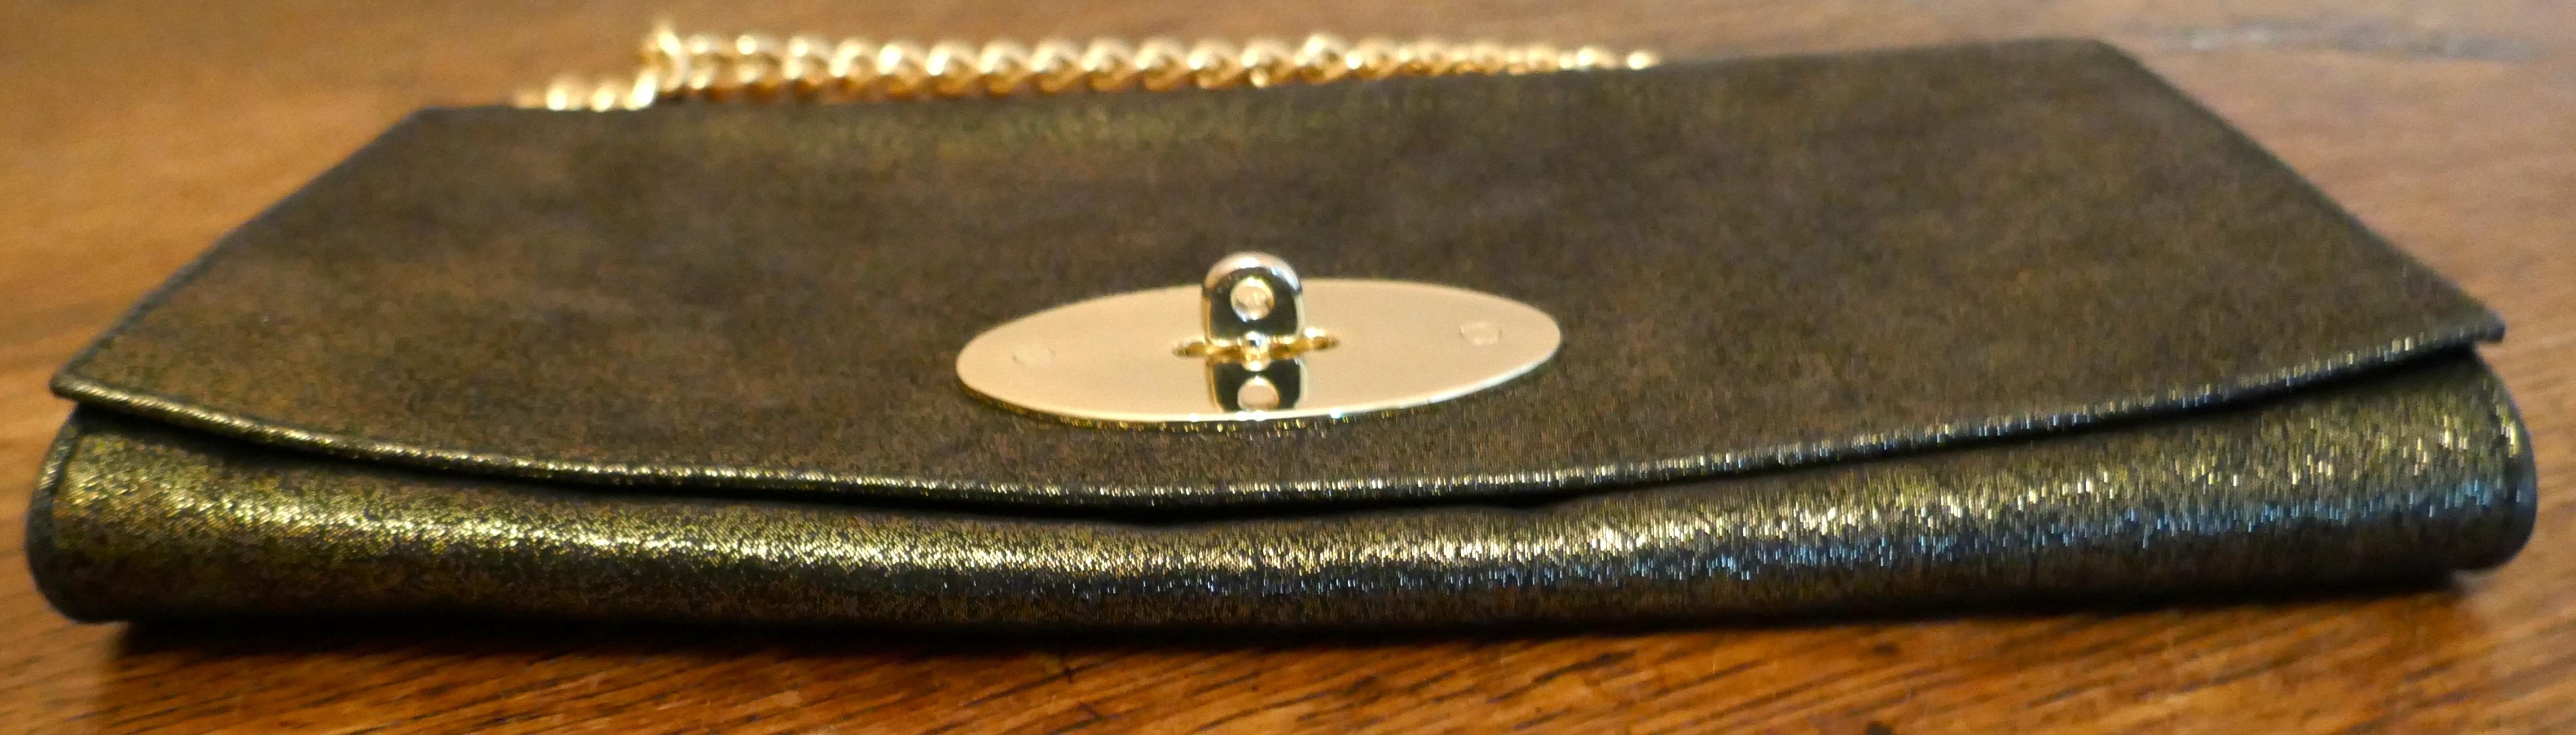 Gold Mulberry Evening Clutch or Chain Handle Bag In Good Condition For Sale In Chillerton, Isle of Wight